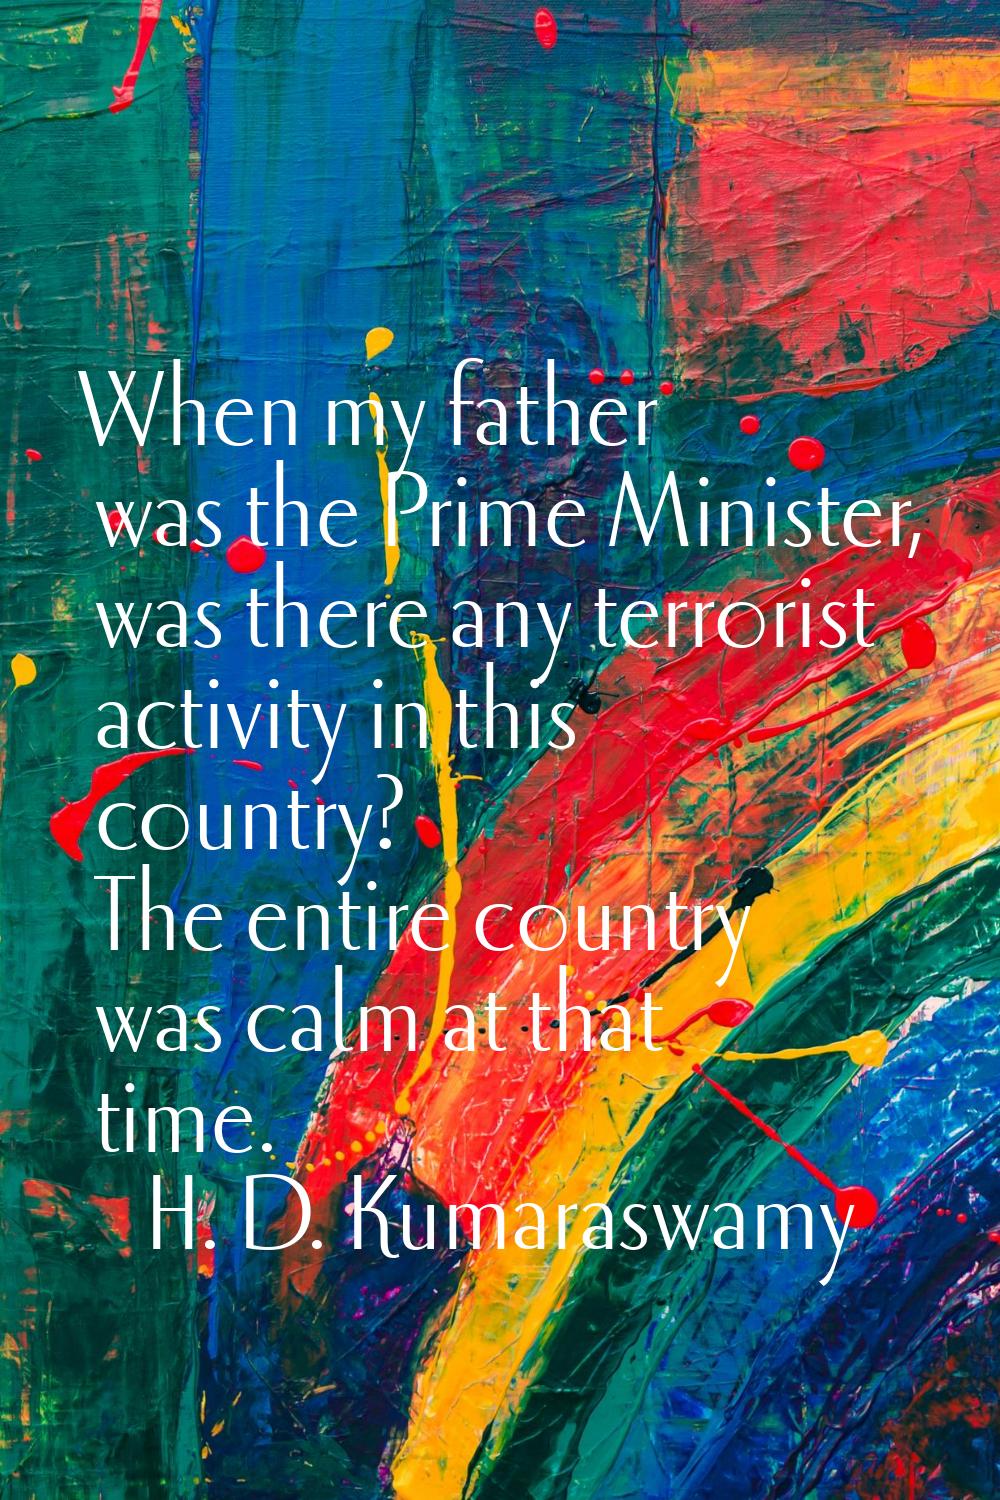 When my father was the Prime Minister, was there any terrorist activity in this country? The entire